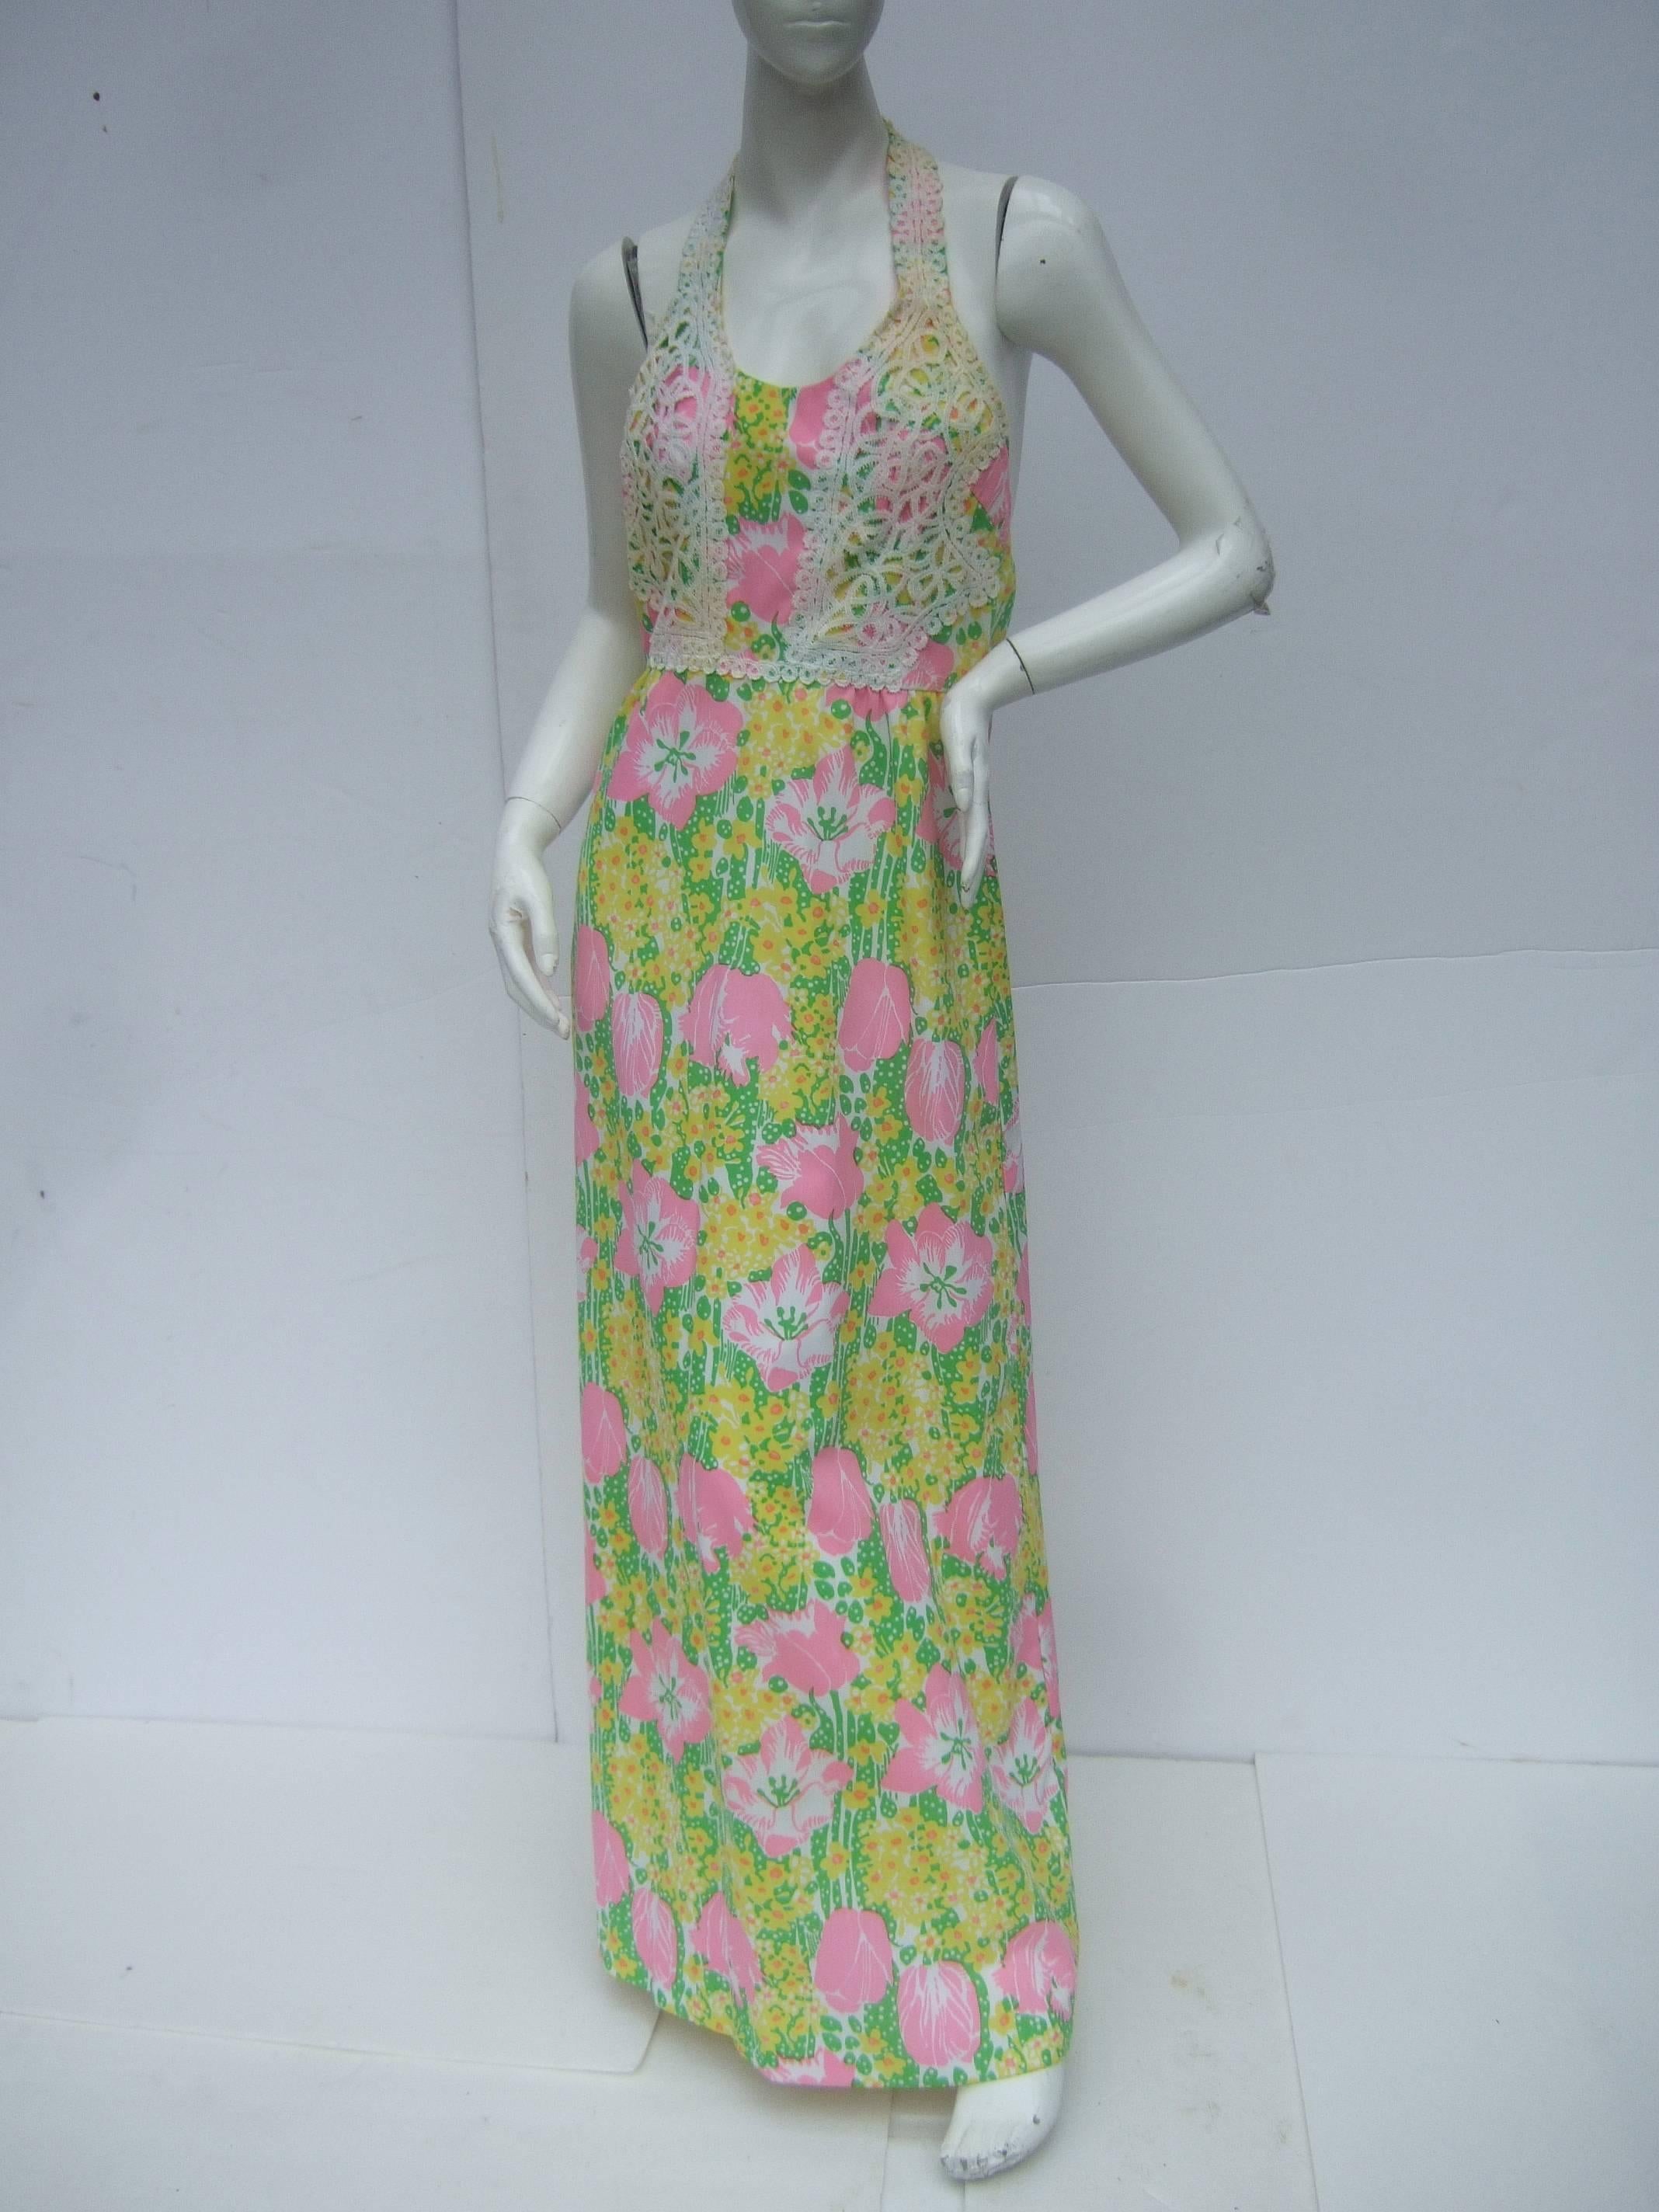 Lilly Pulitzer Vibrant floral print halter gown c 1970s
The crisp cotton blend backless gown is designed 
with a field of lush flower blooms that range
from cotton candy pink to buttercup yellow

Interspersed within the bold color